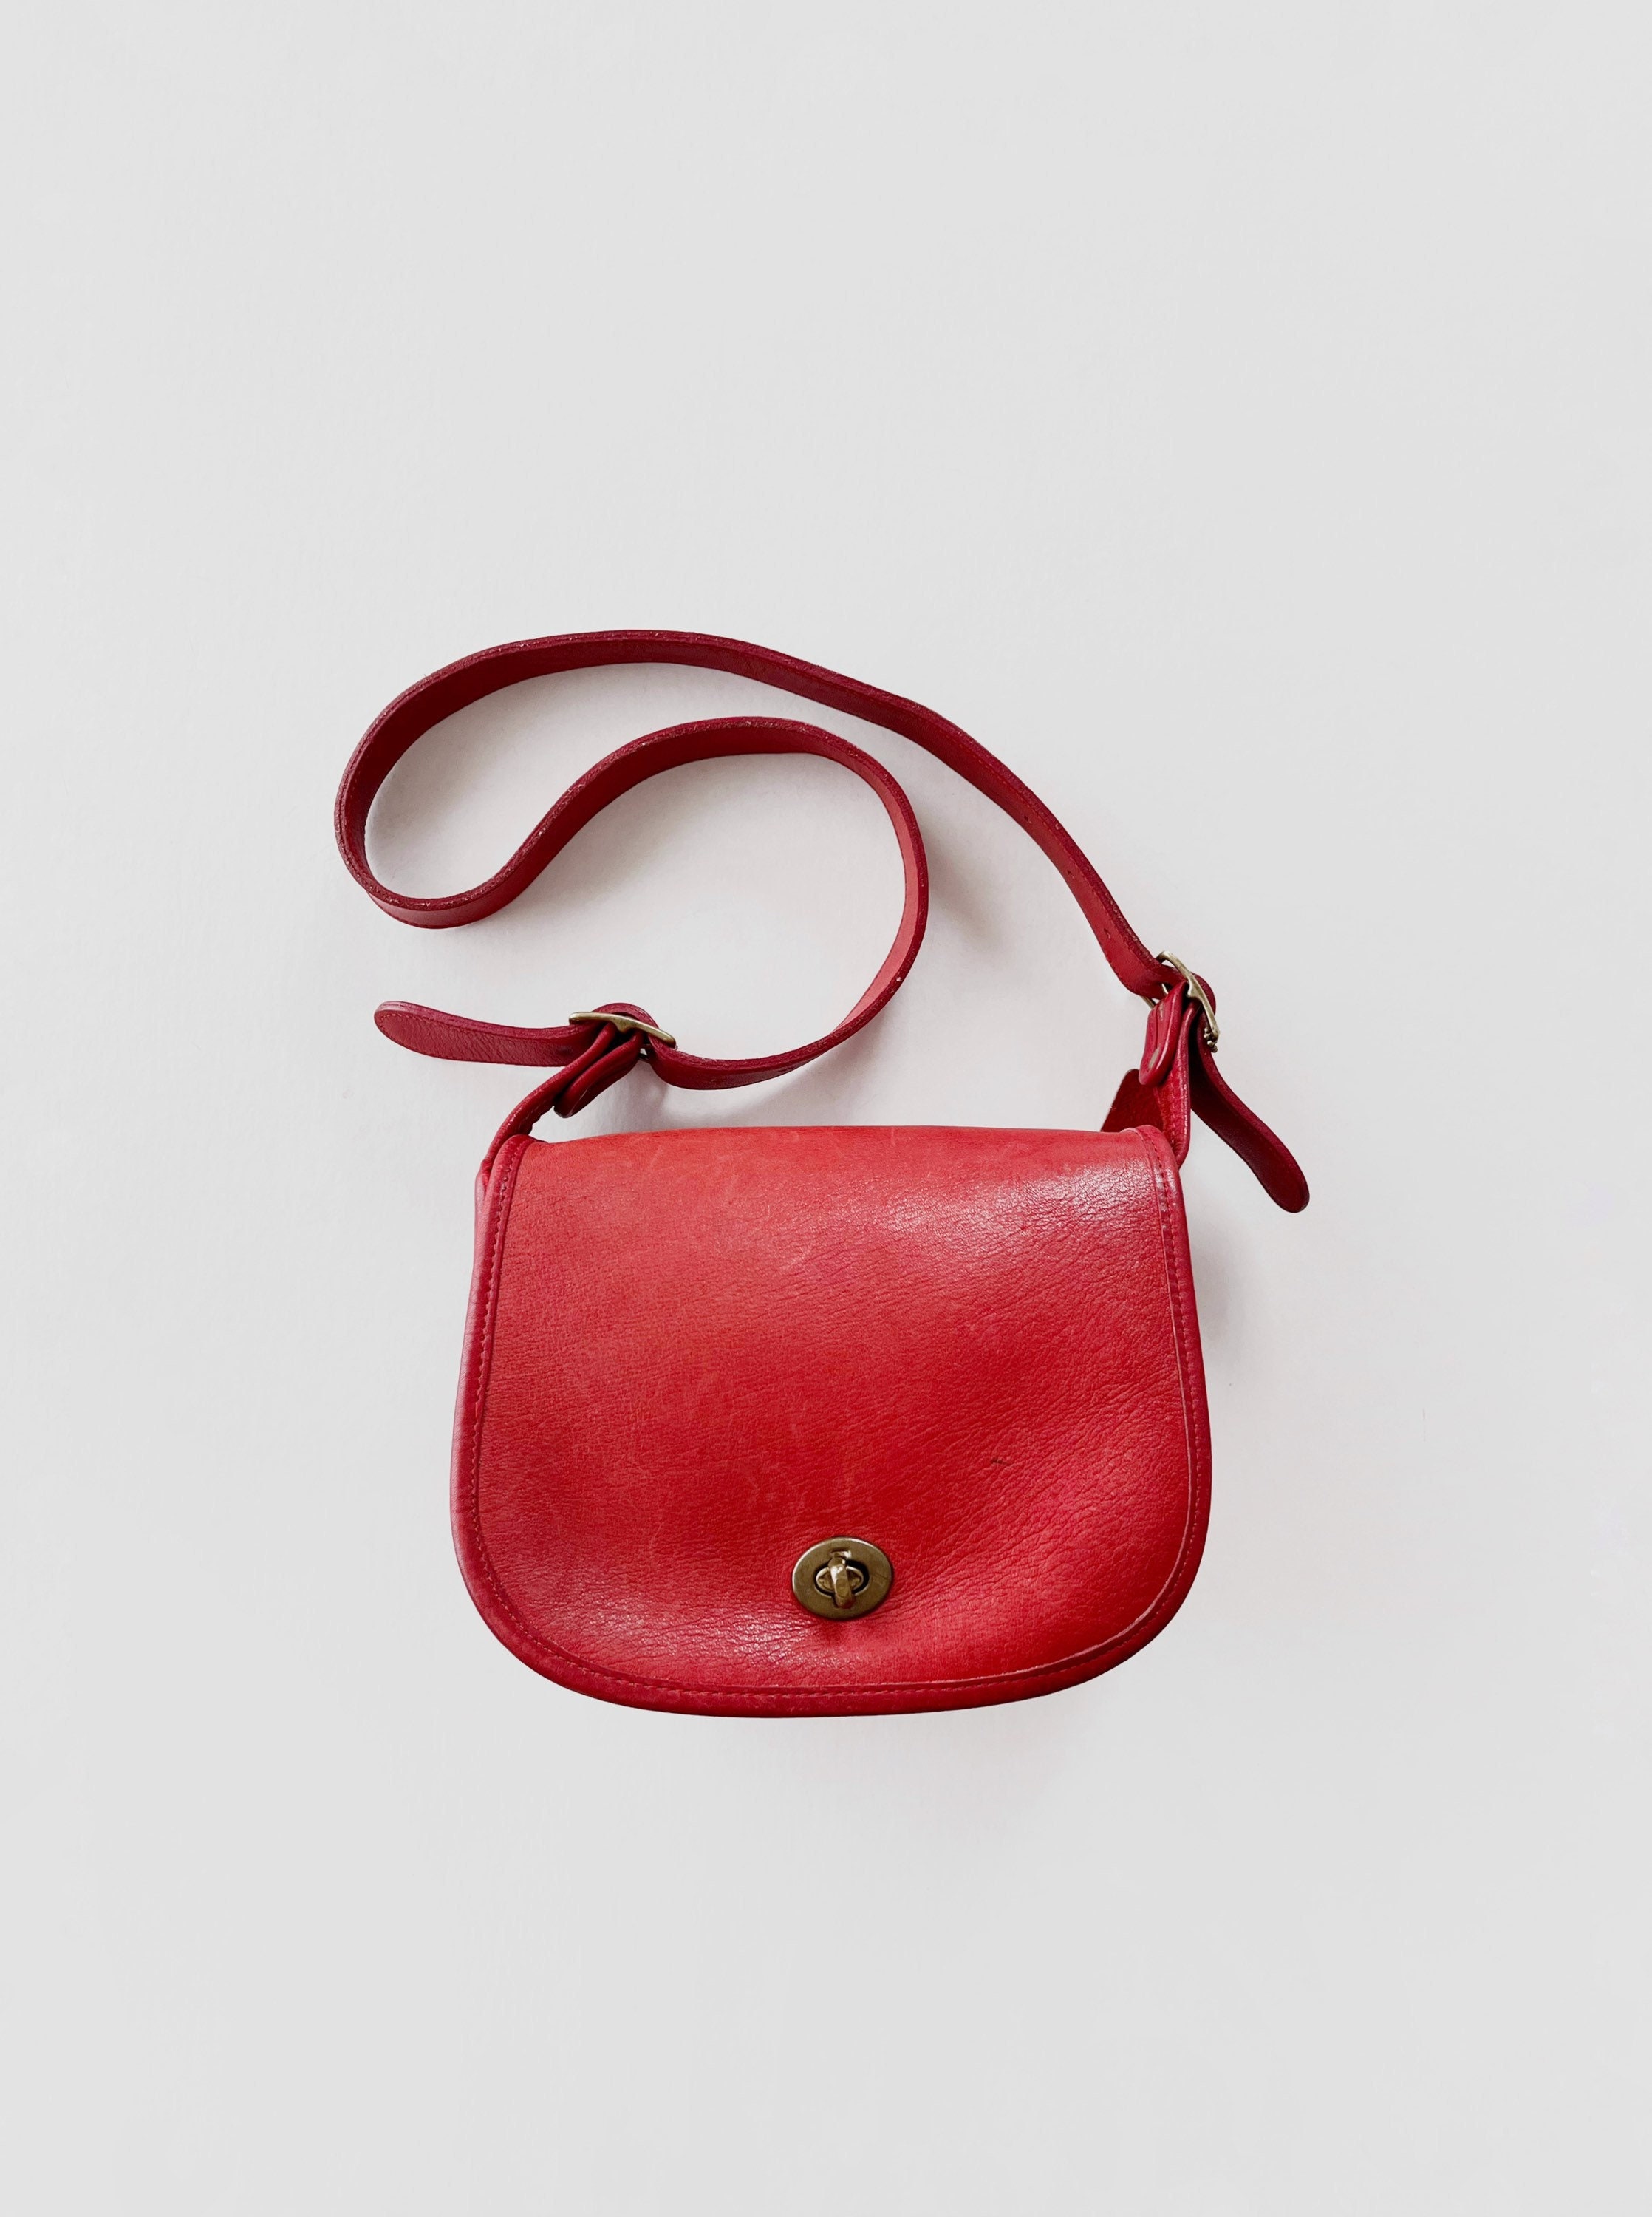 Coach Vintage Red Leather Small Mini Bag